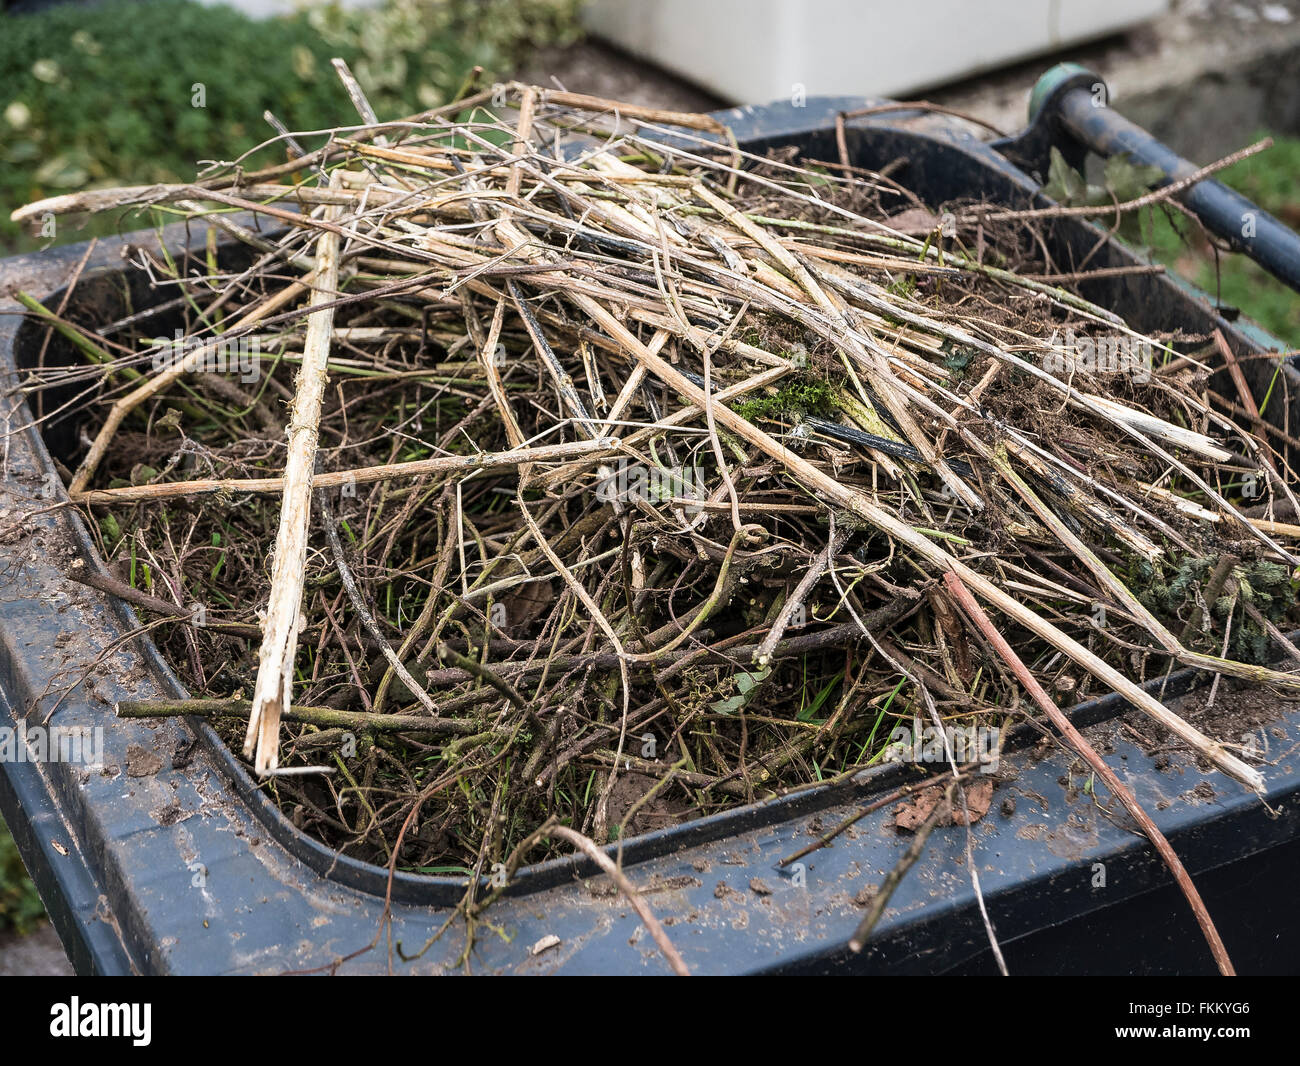 Over-full Green Recycling bin filled with garden refuse Stock Photo